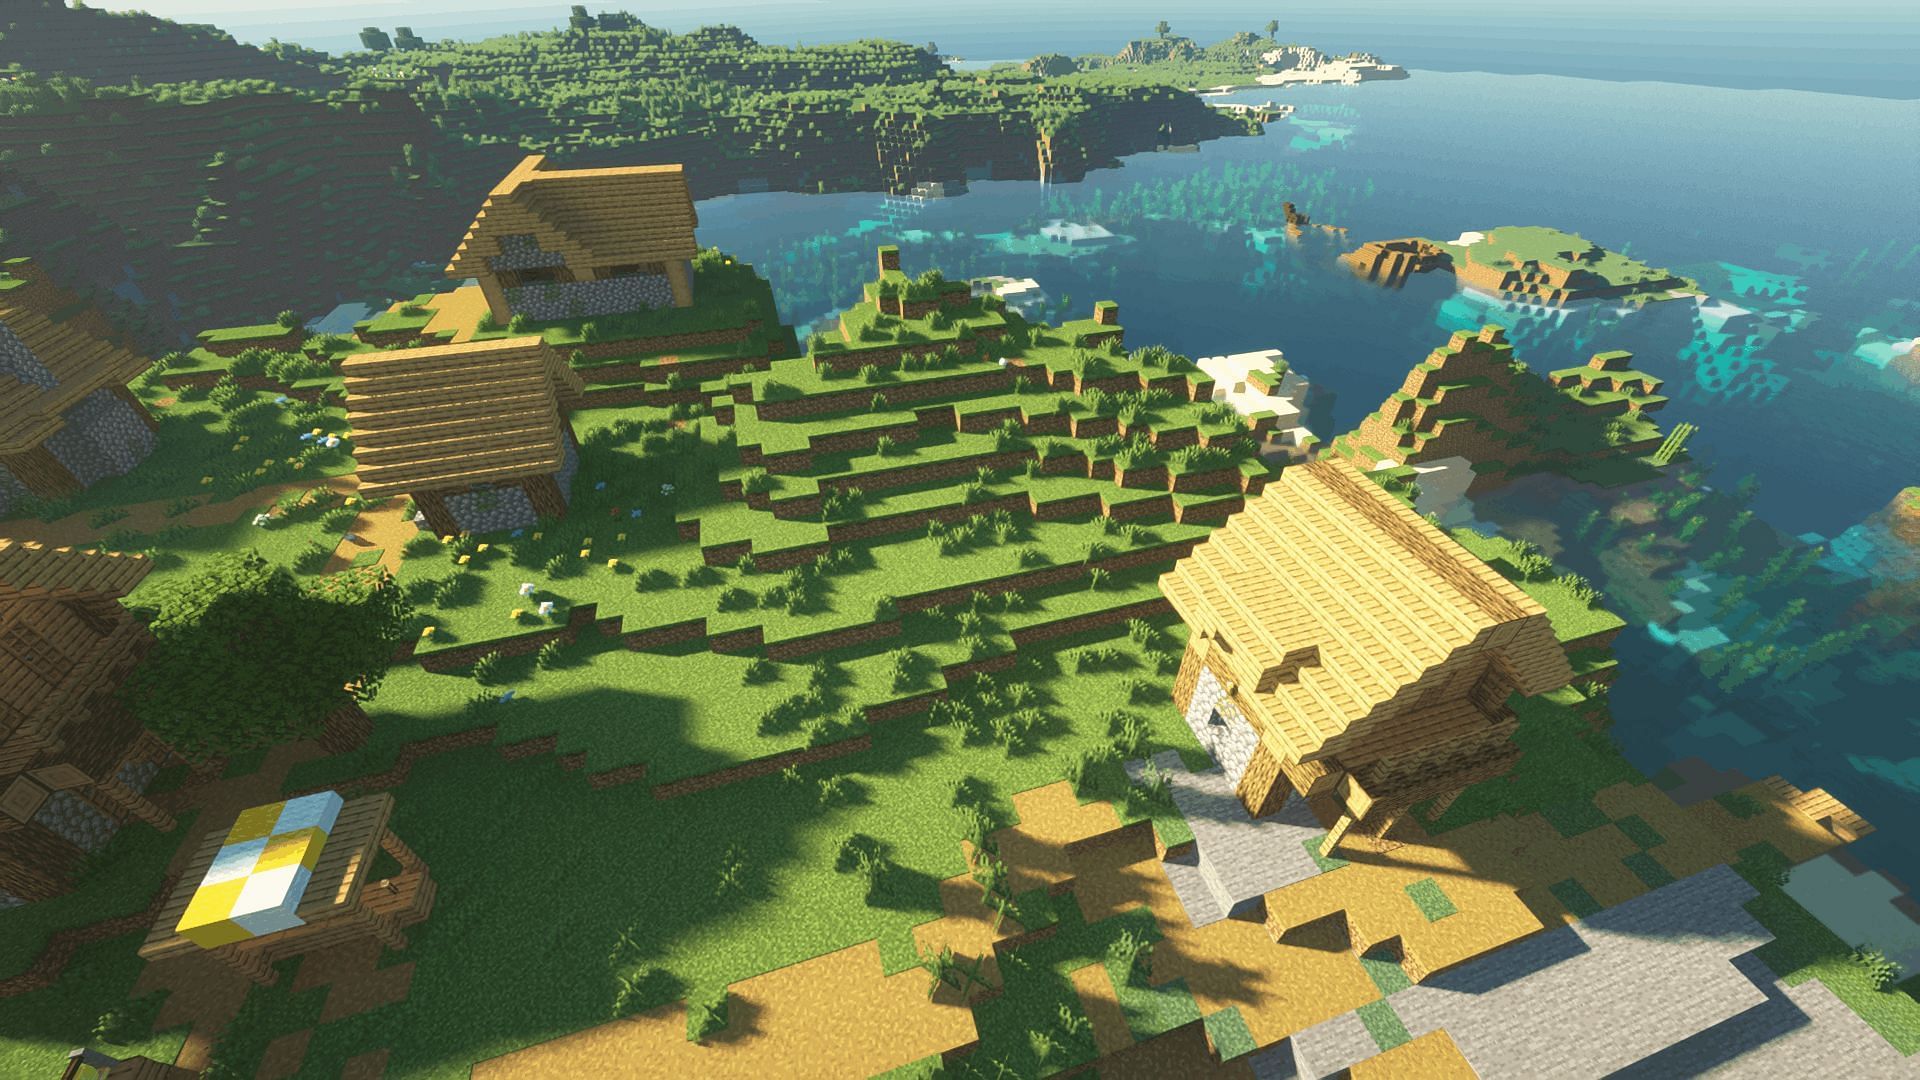 Minecraft with the SEUS Shader applied, which requires OptiFine (Image via Minecraft)